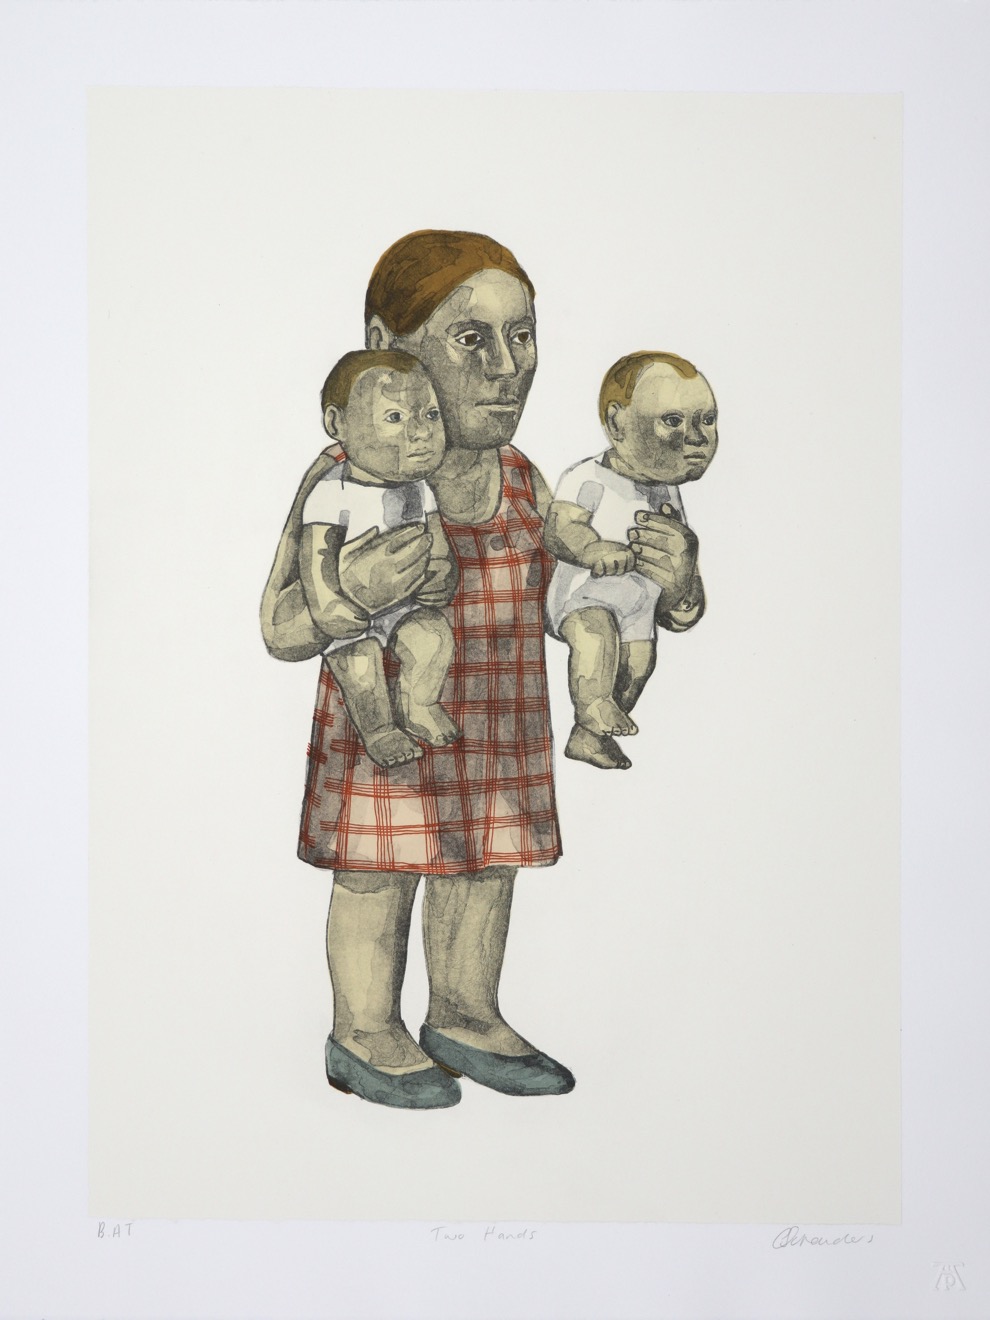 Female figure in red chequered dress holding a baby in each hand